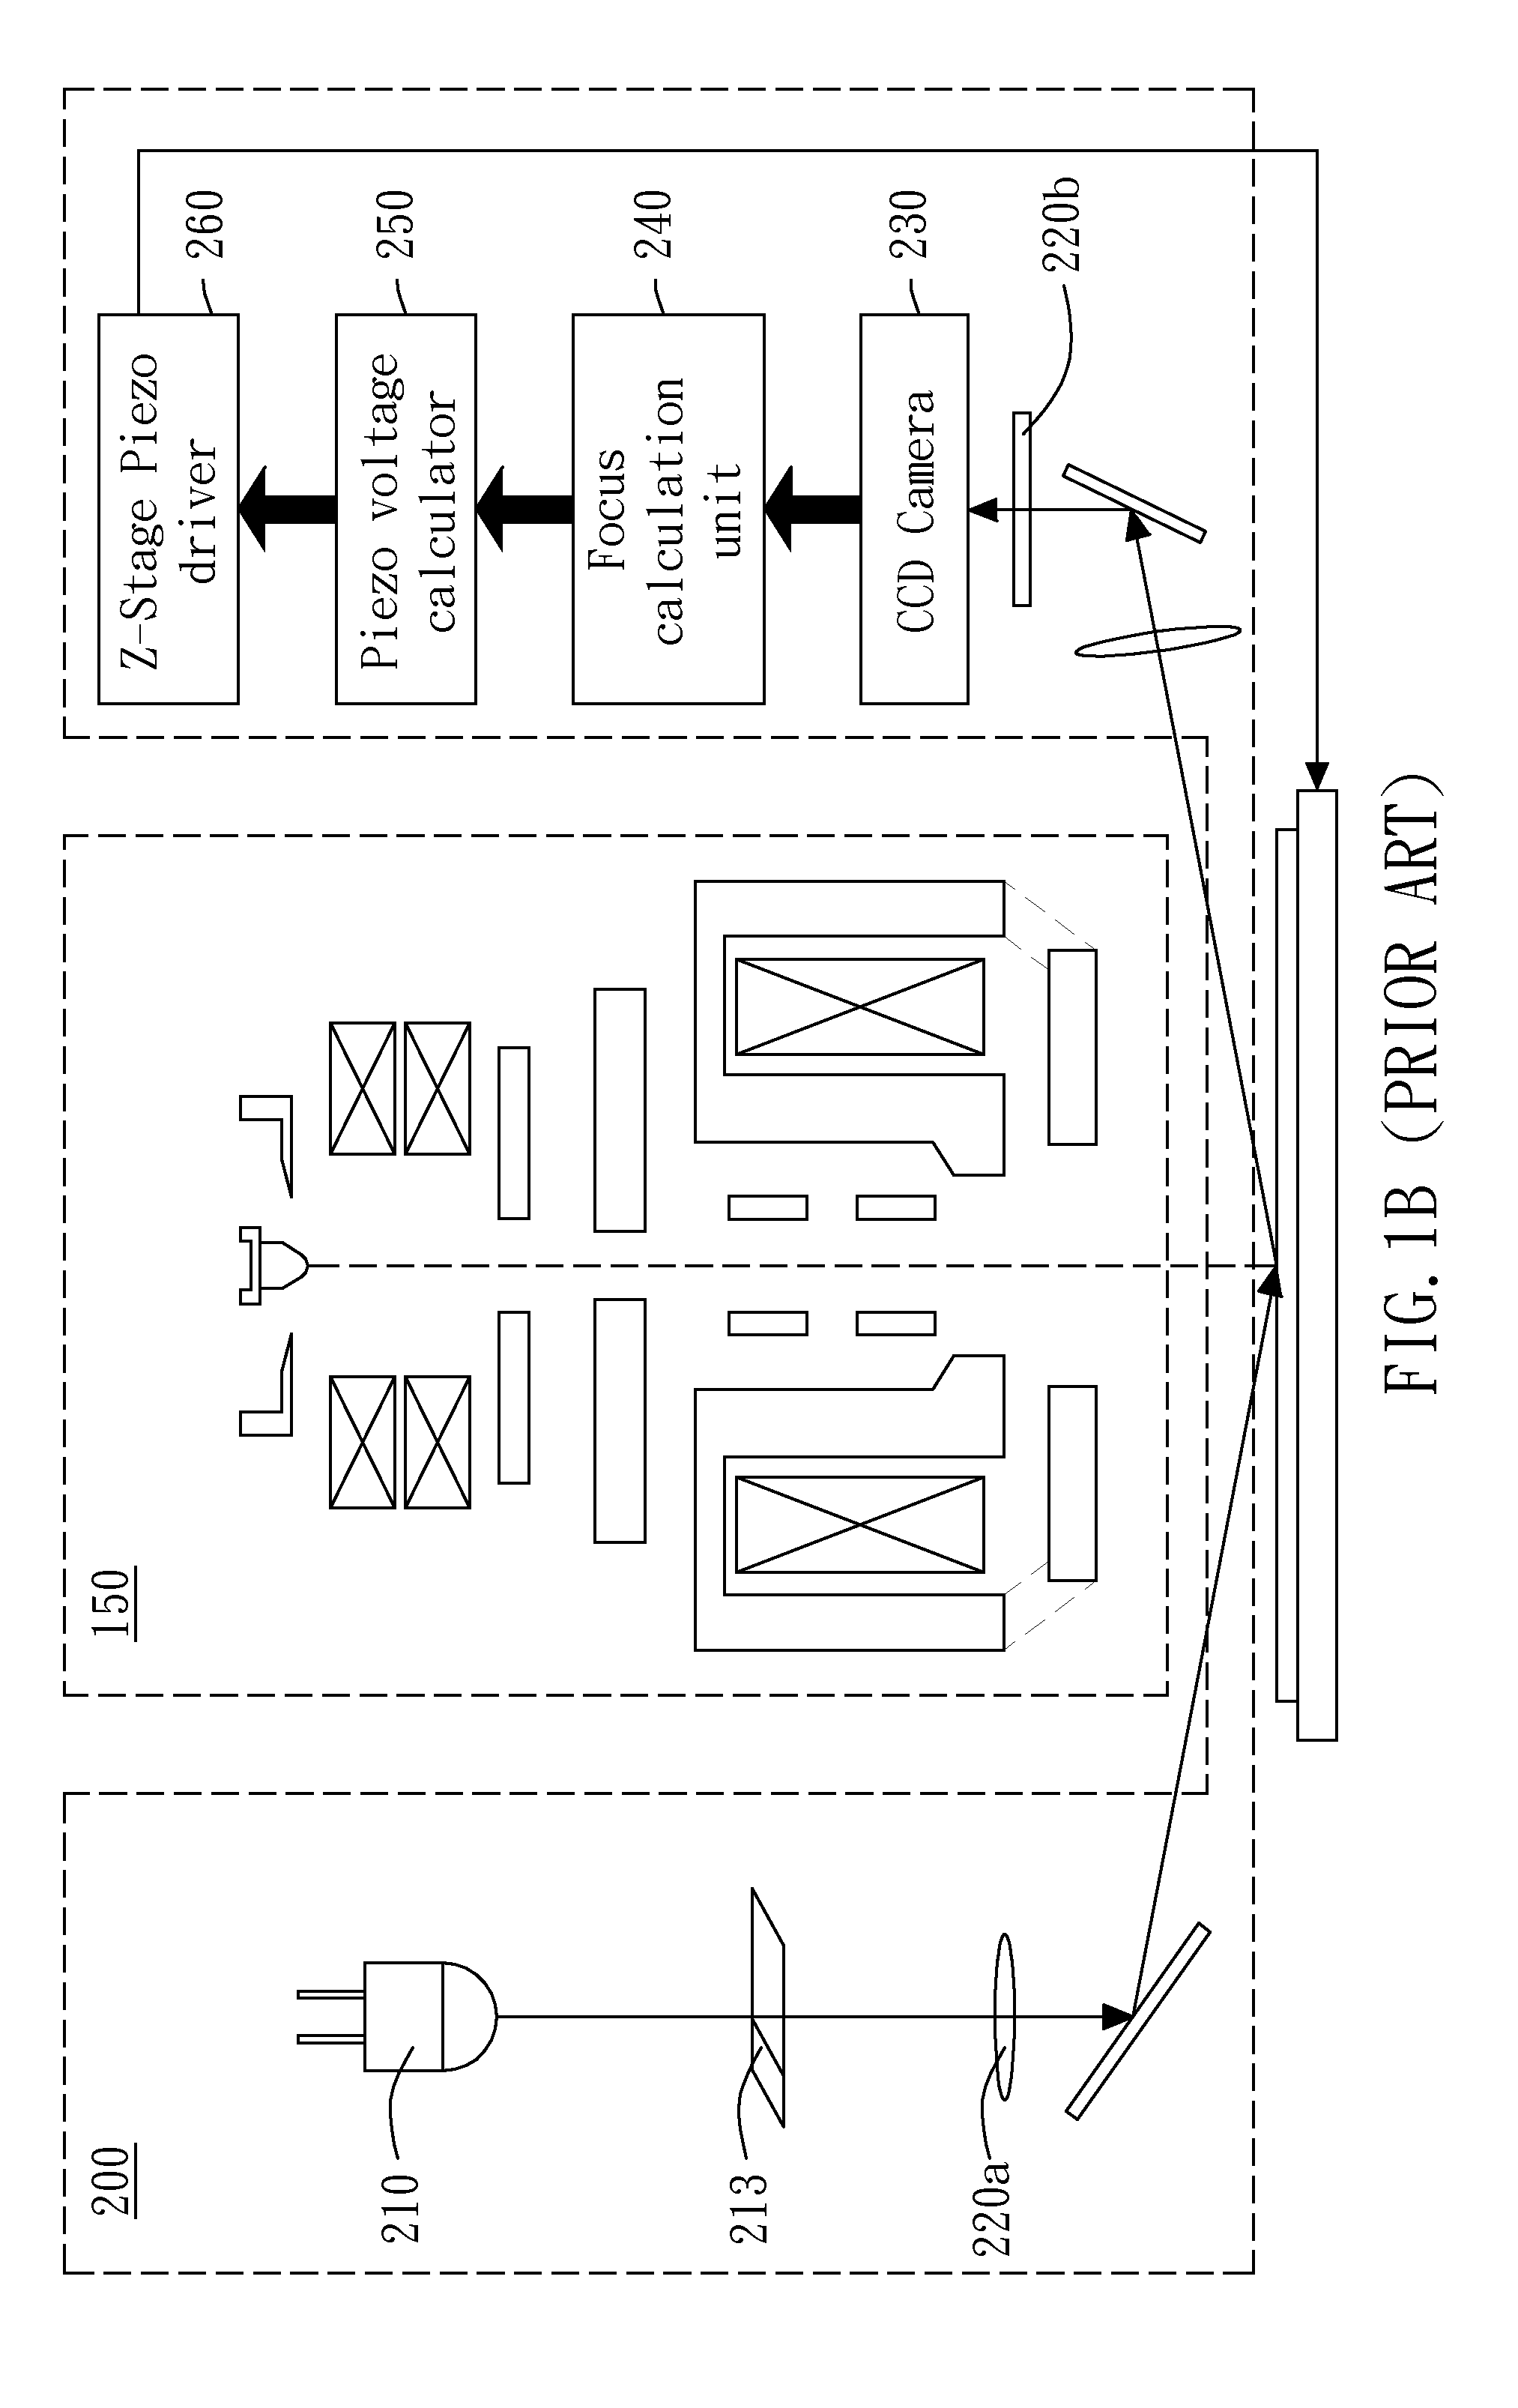 Dynamic Focus Adjustment with Optical Height Detection Apparatus in Electron Beam system